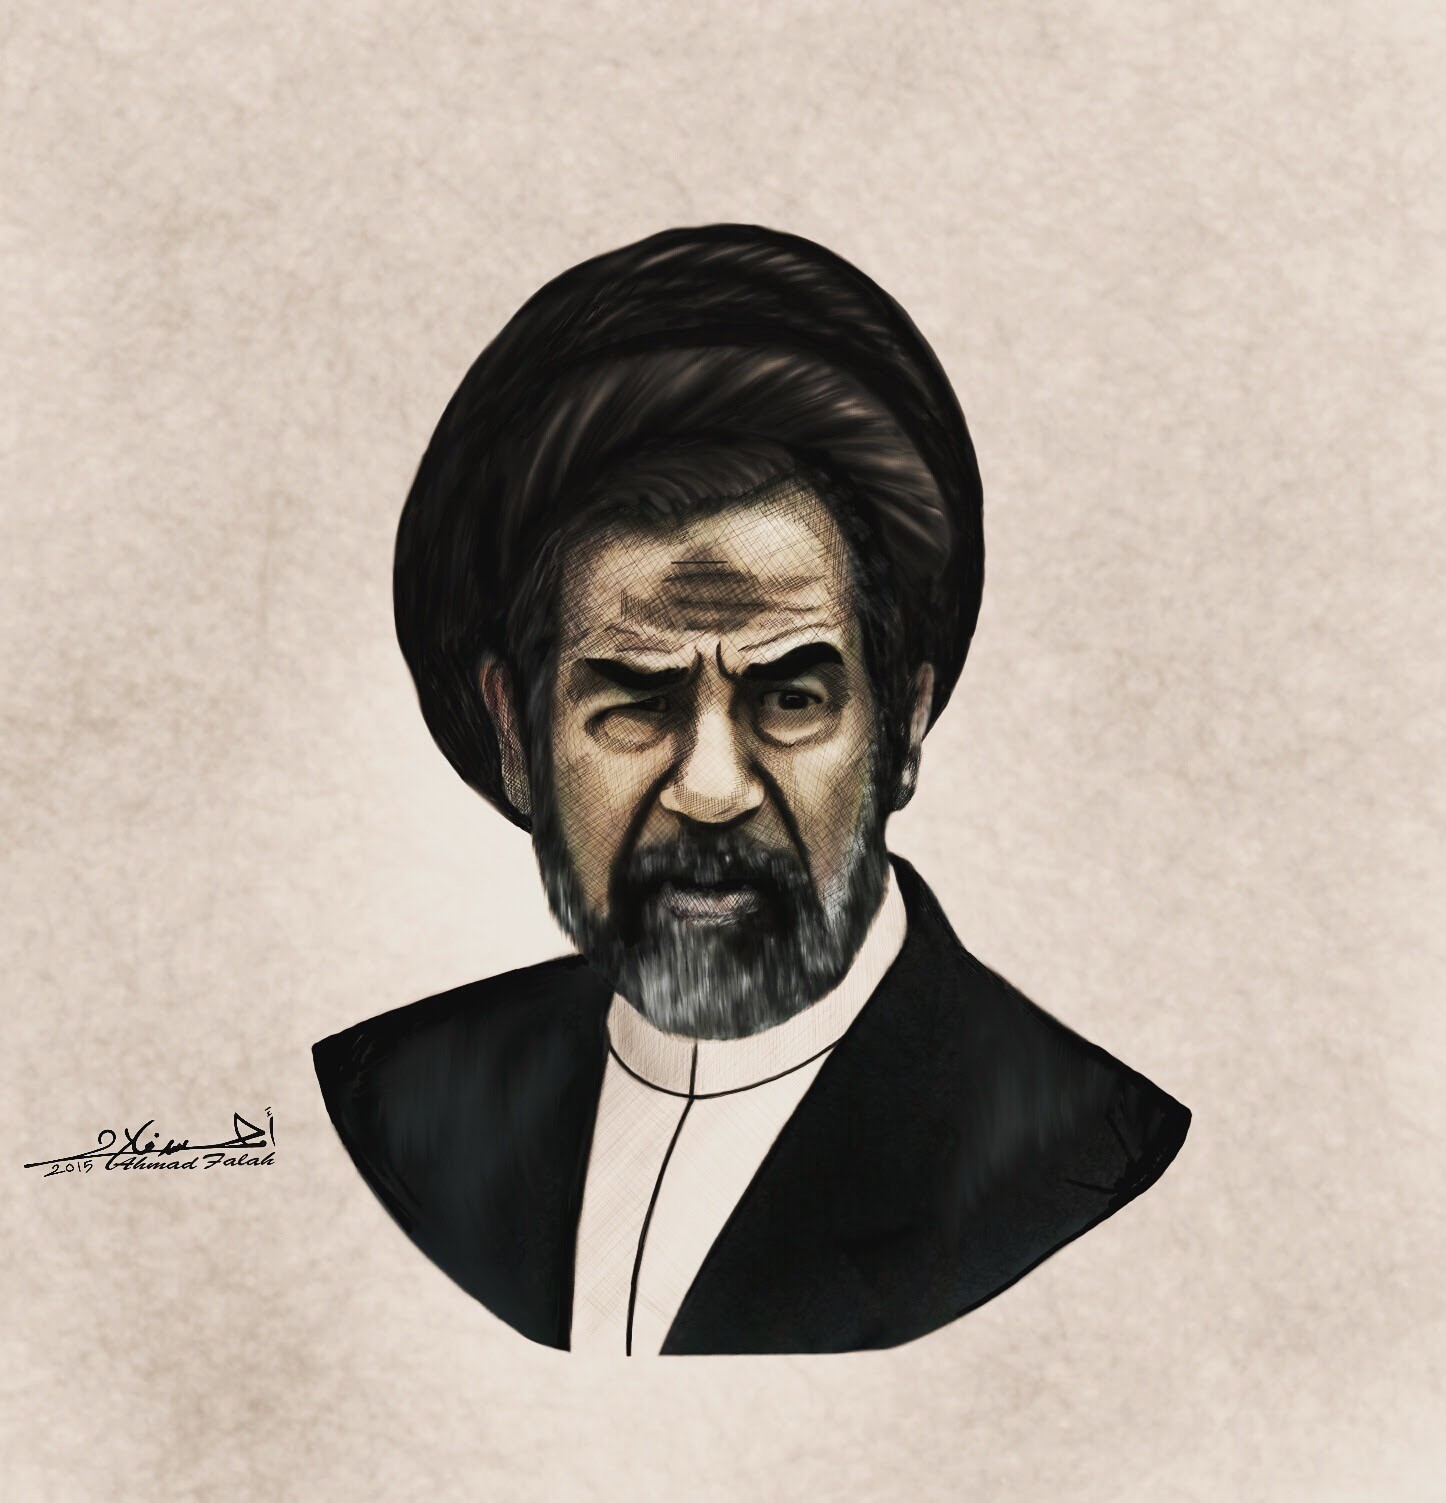 Iraqi artist, political cartoonist's Ahmad Falah's depiction of Saddam wearing the turban of a cleric, with a prayer bump on the forehead, mockingly showing his dedication to prayer. Photo.